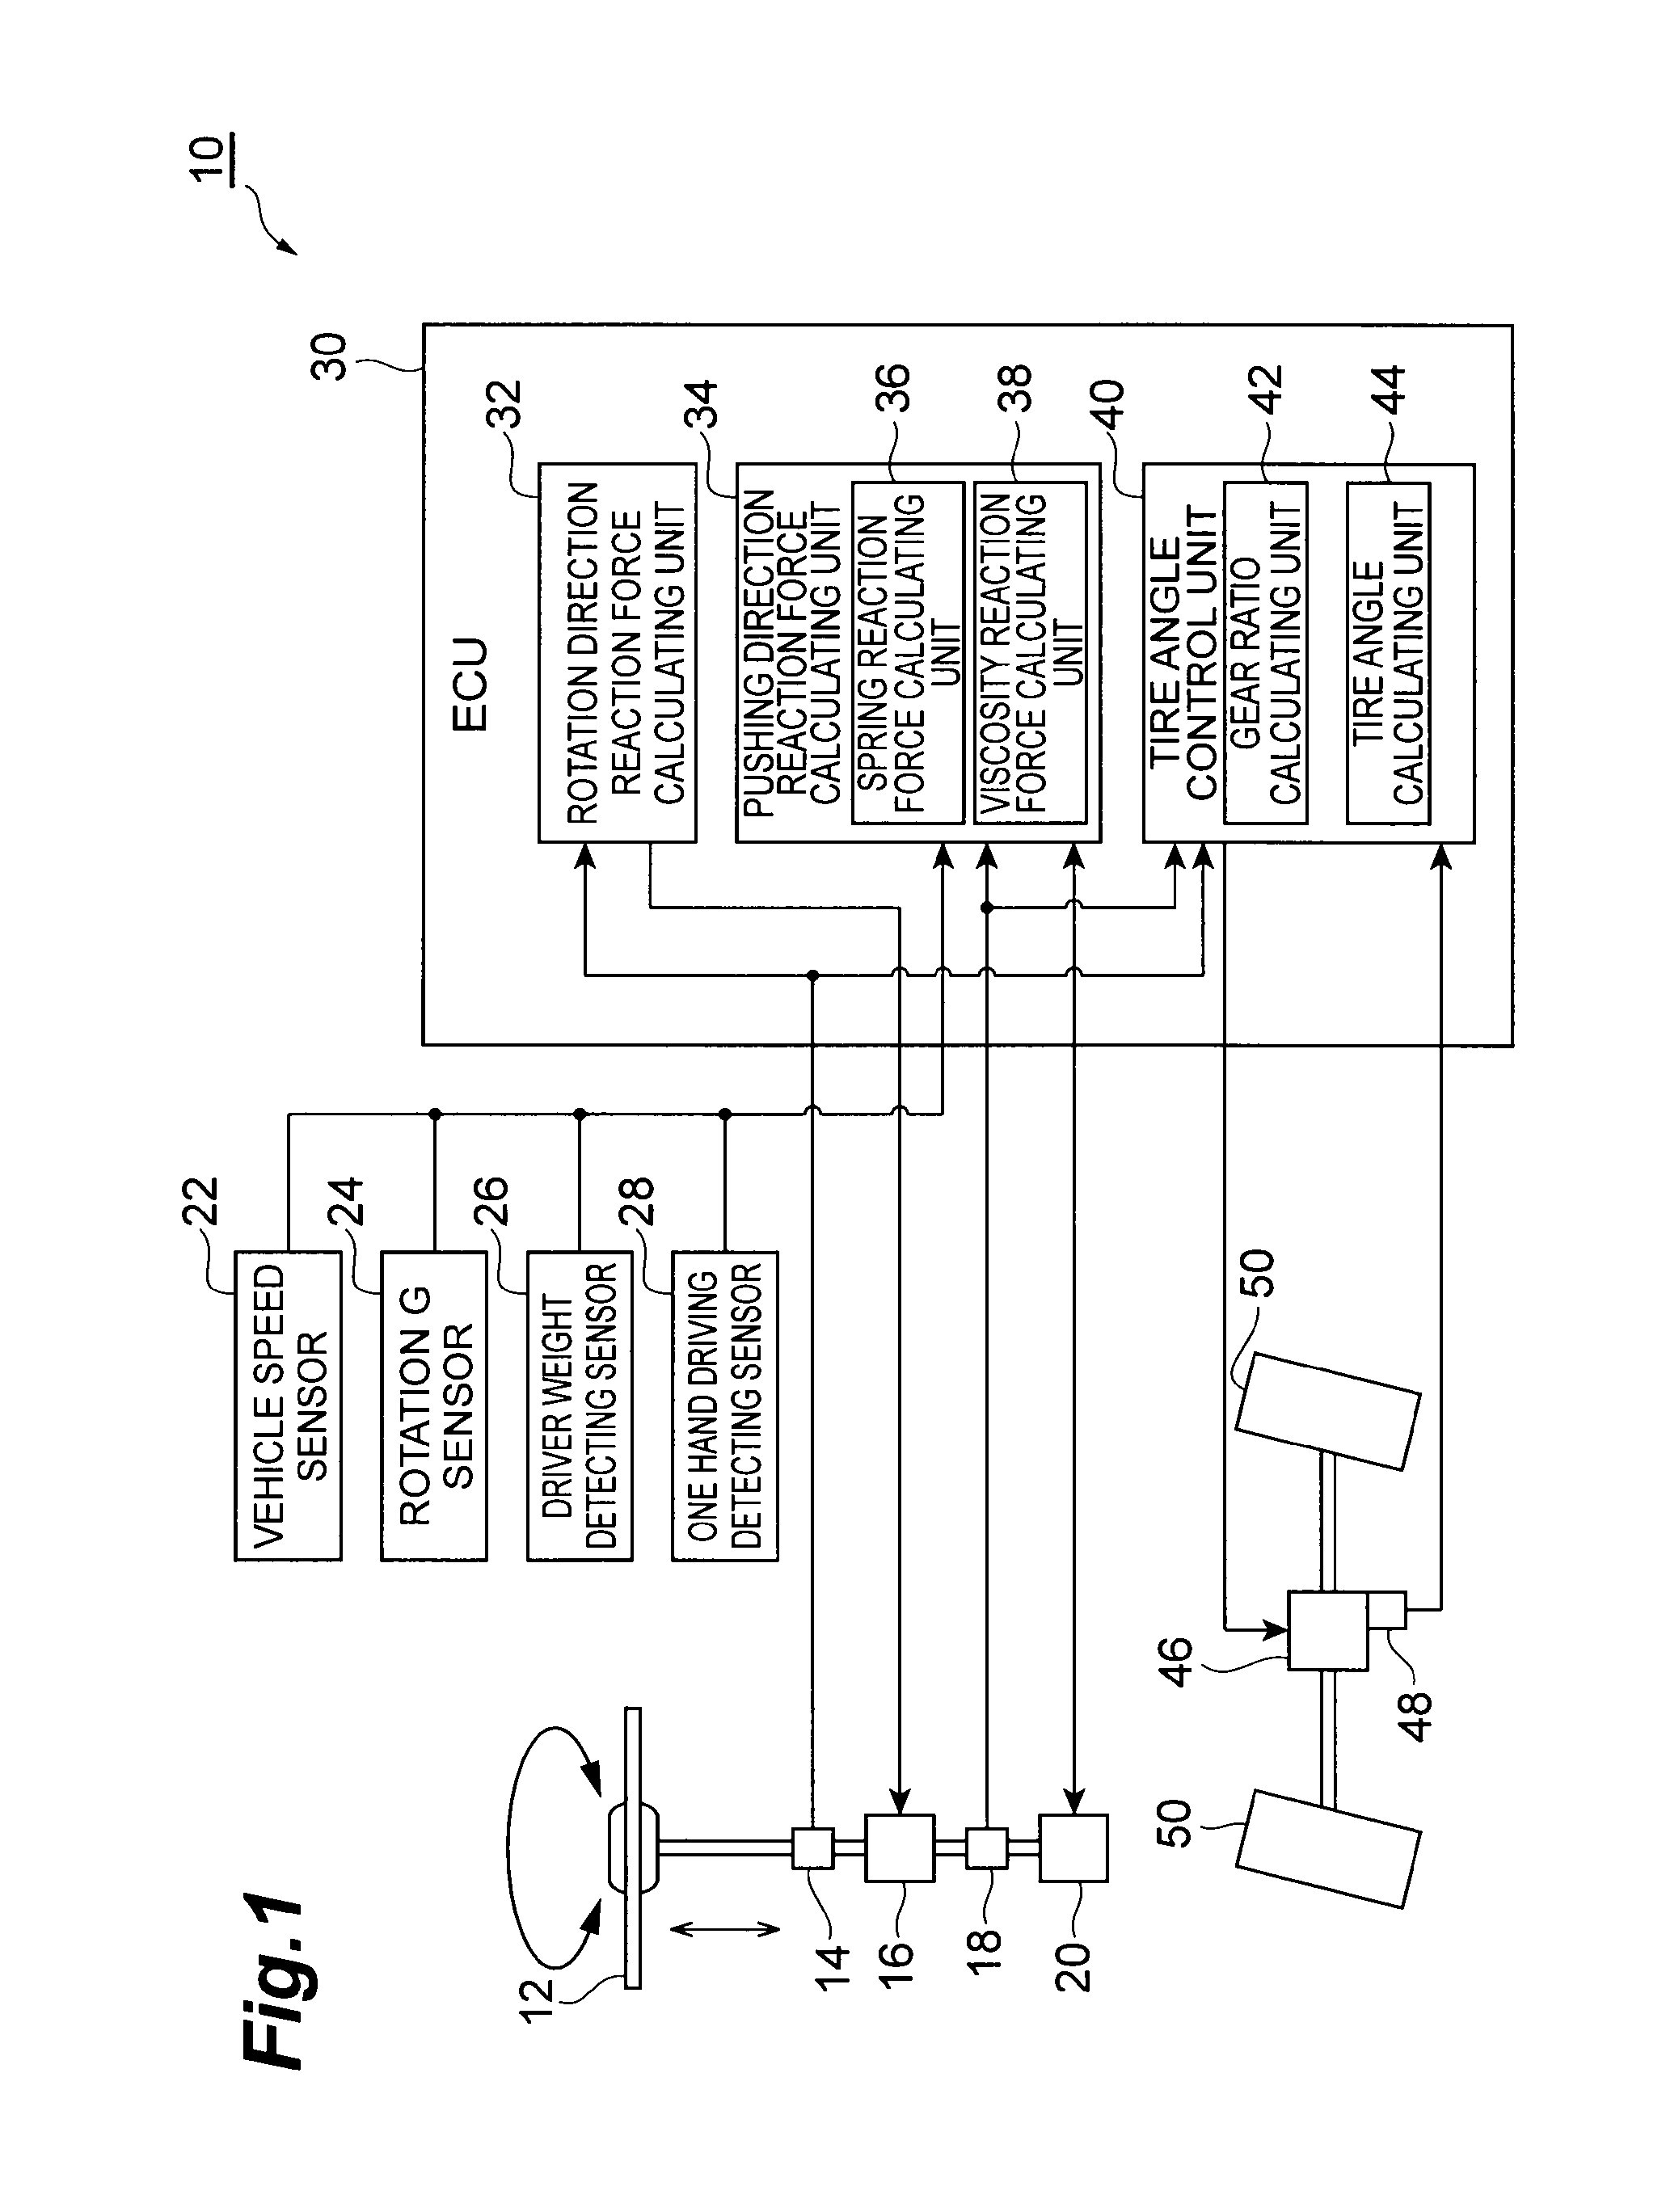 Steering control system